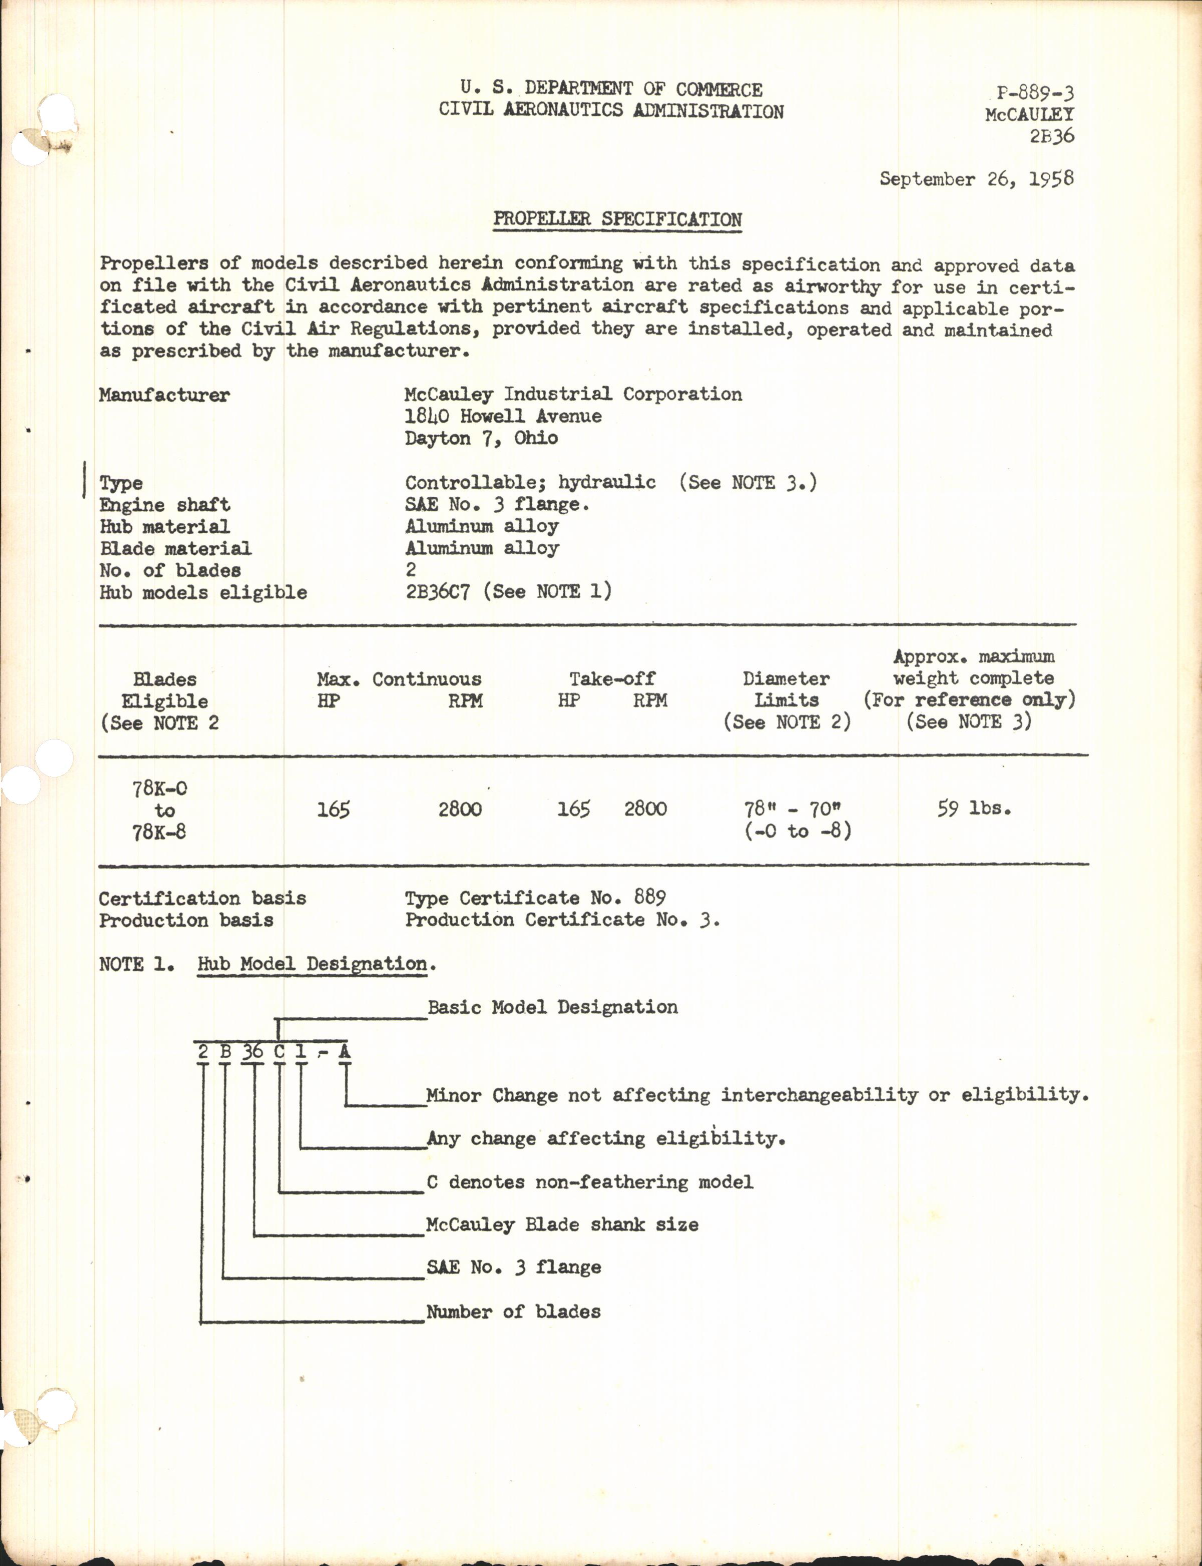 Sample page 1 from AirCorps Library document: 2B36